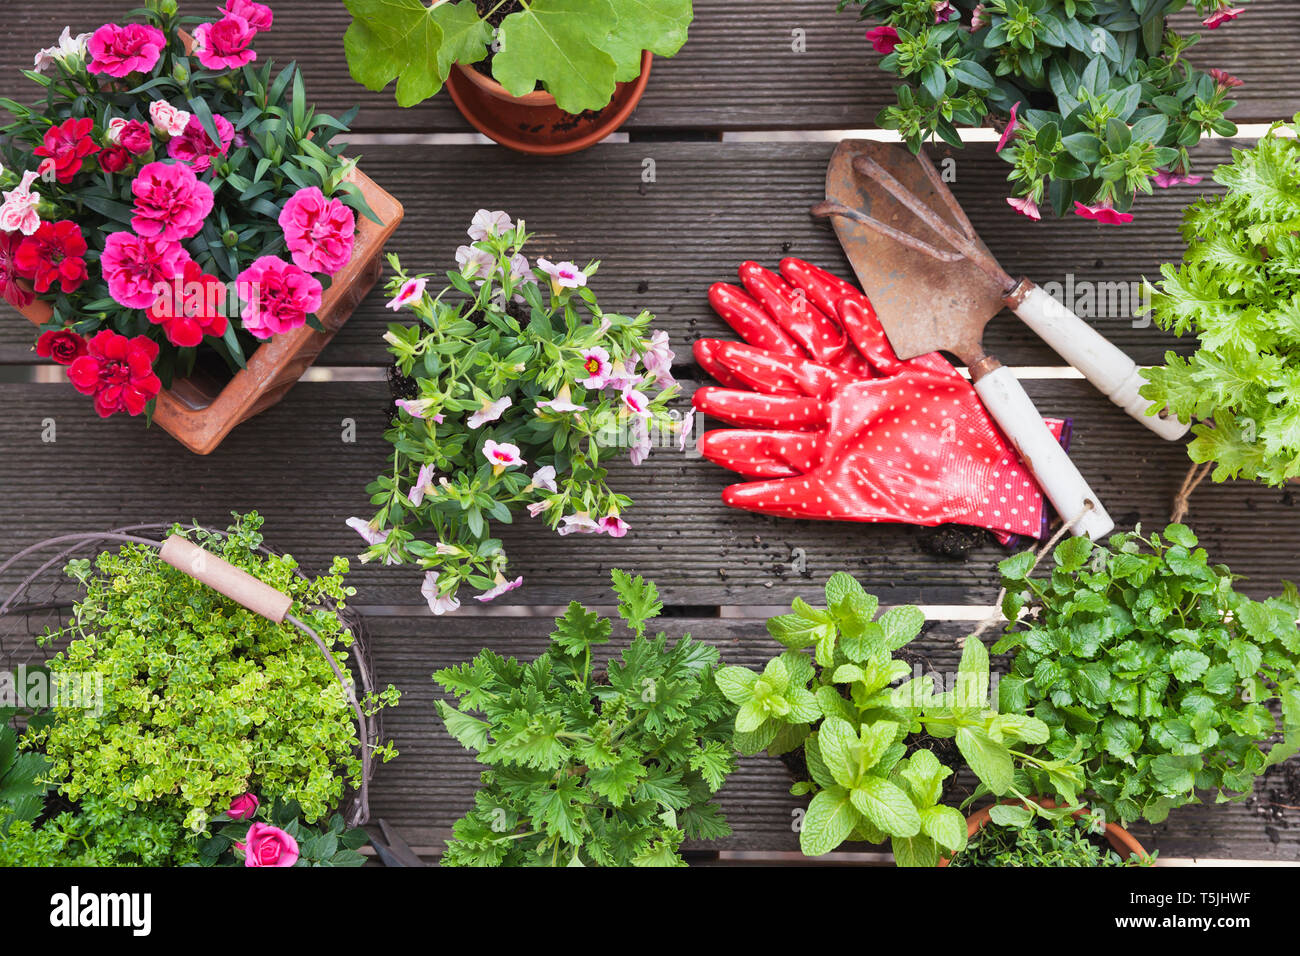 Planting herbs and flowers for indoor farming on a balcony Stock Photo